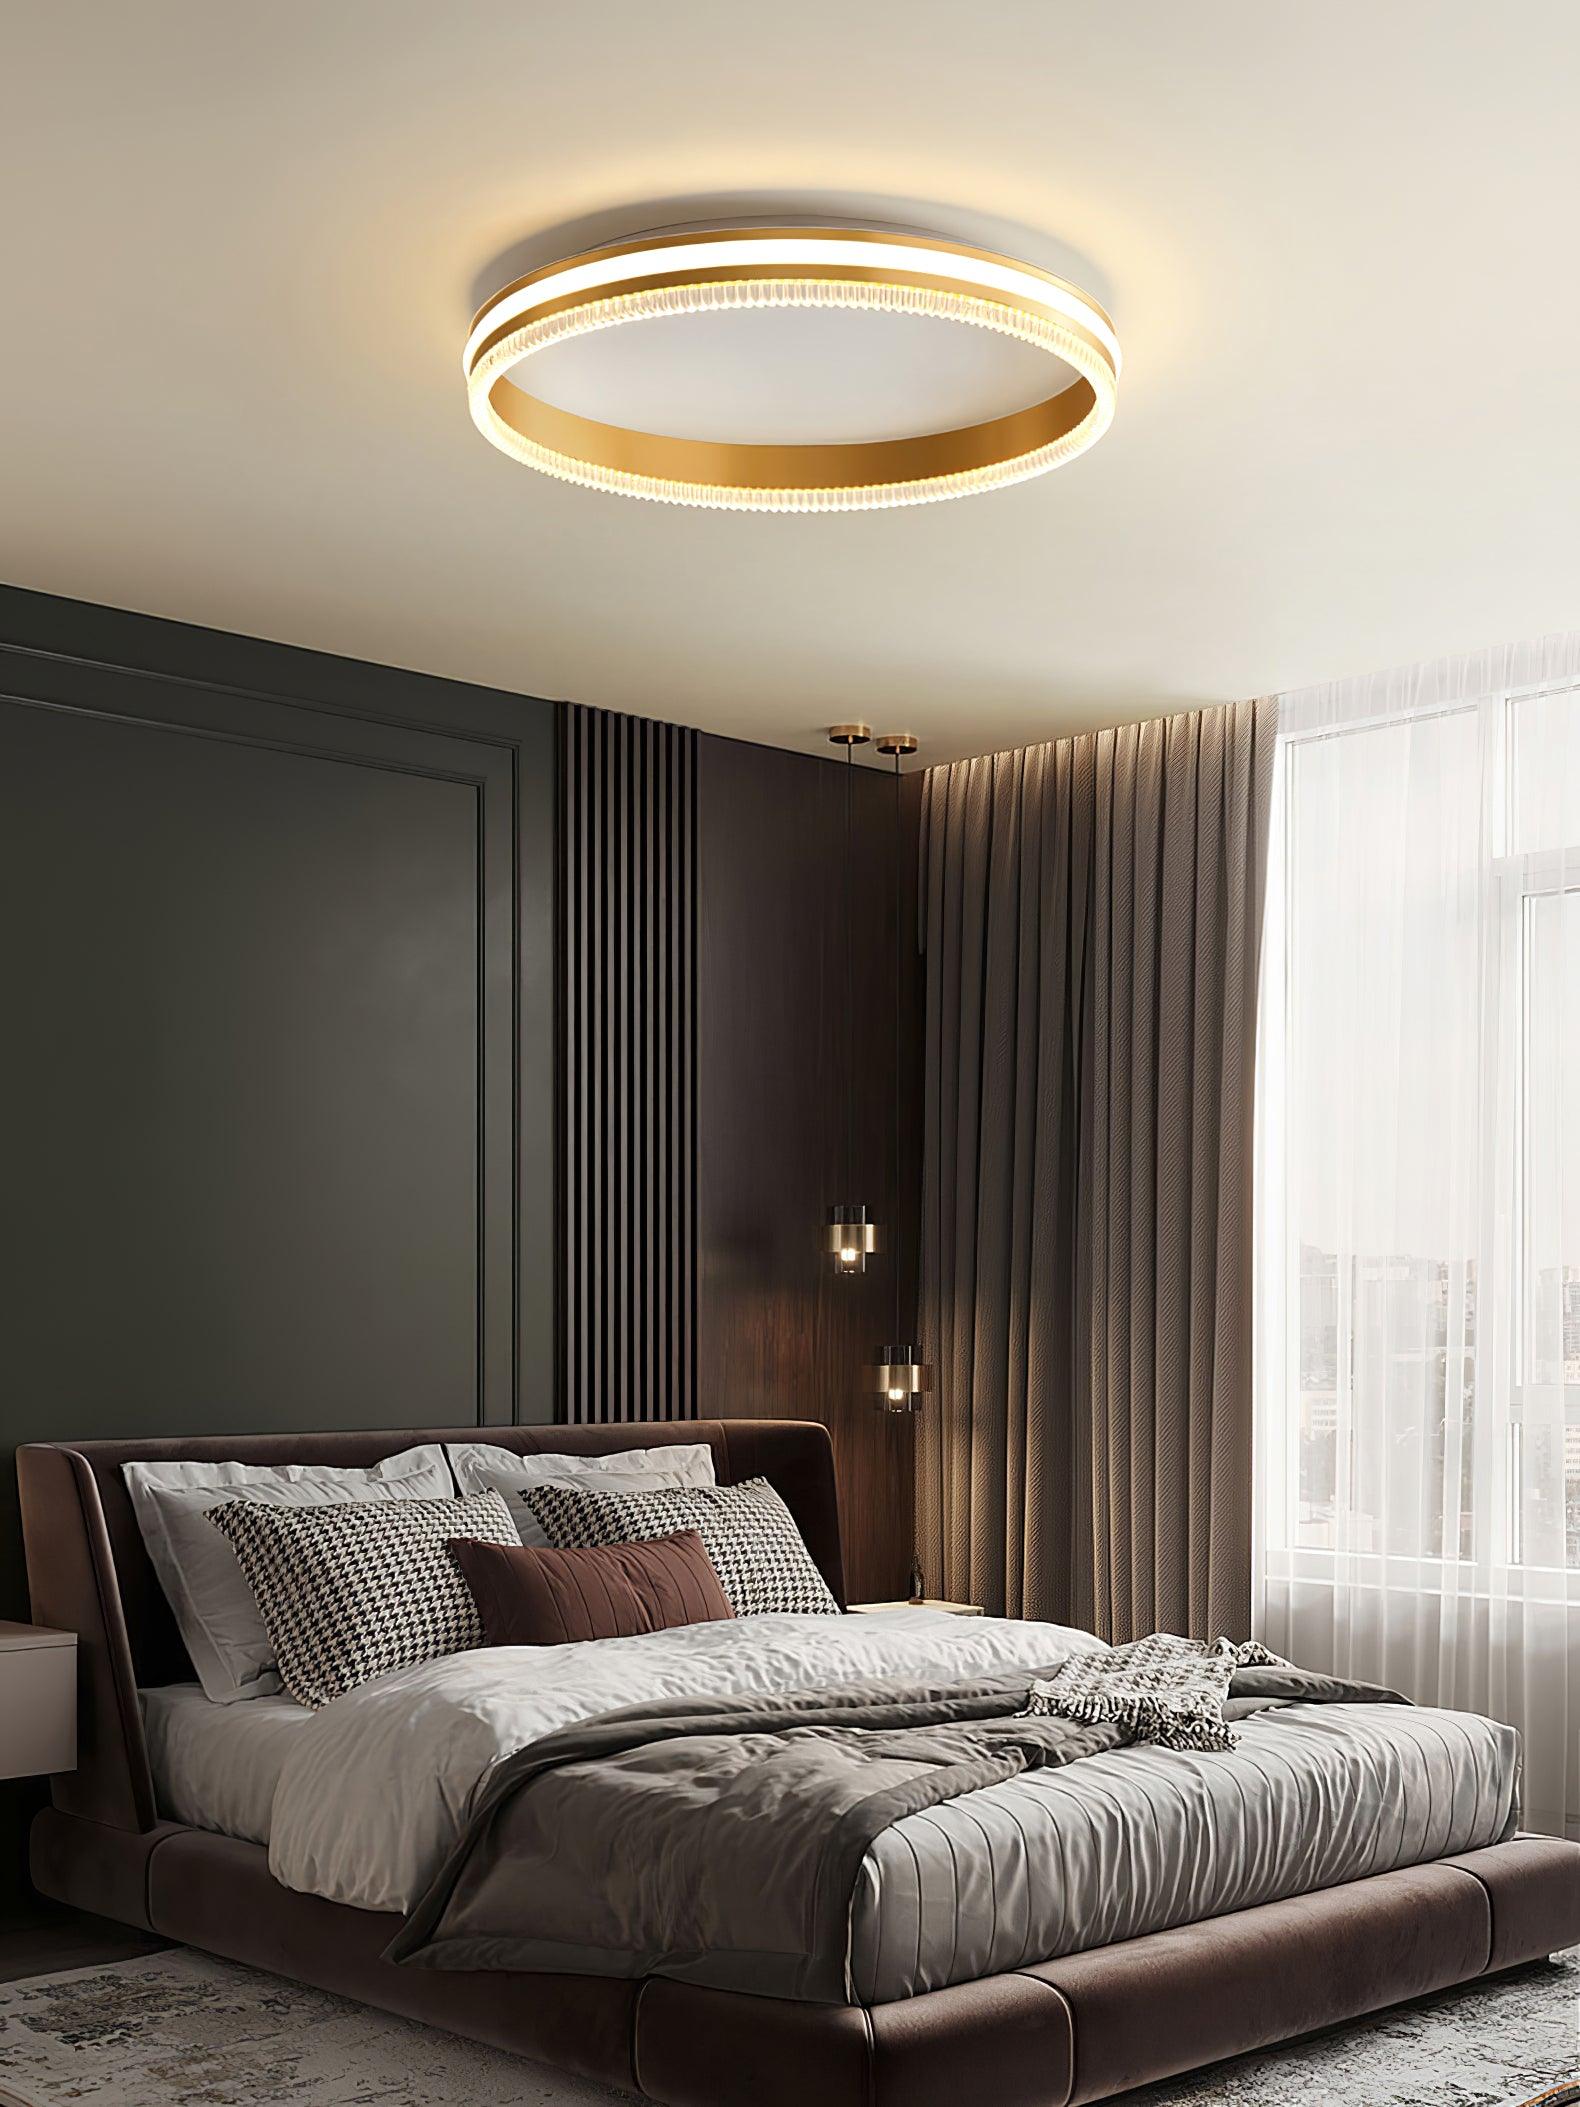 6-ring LED recessed light